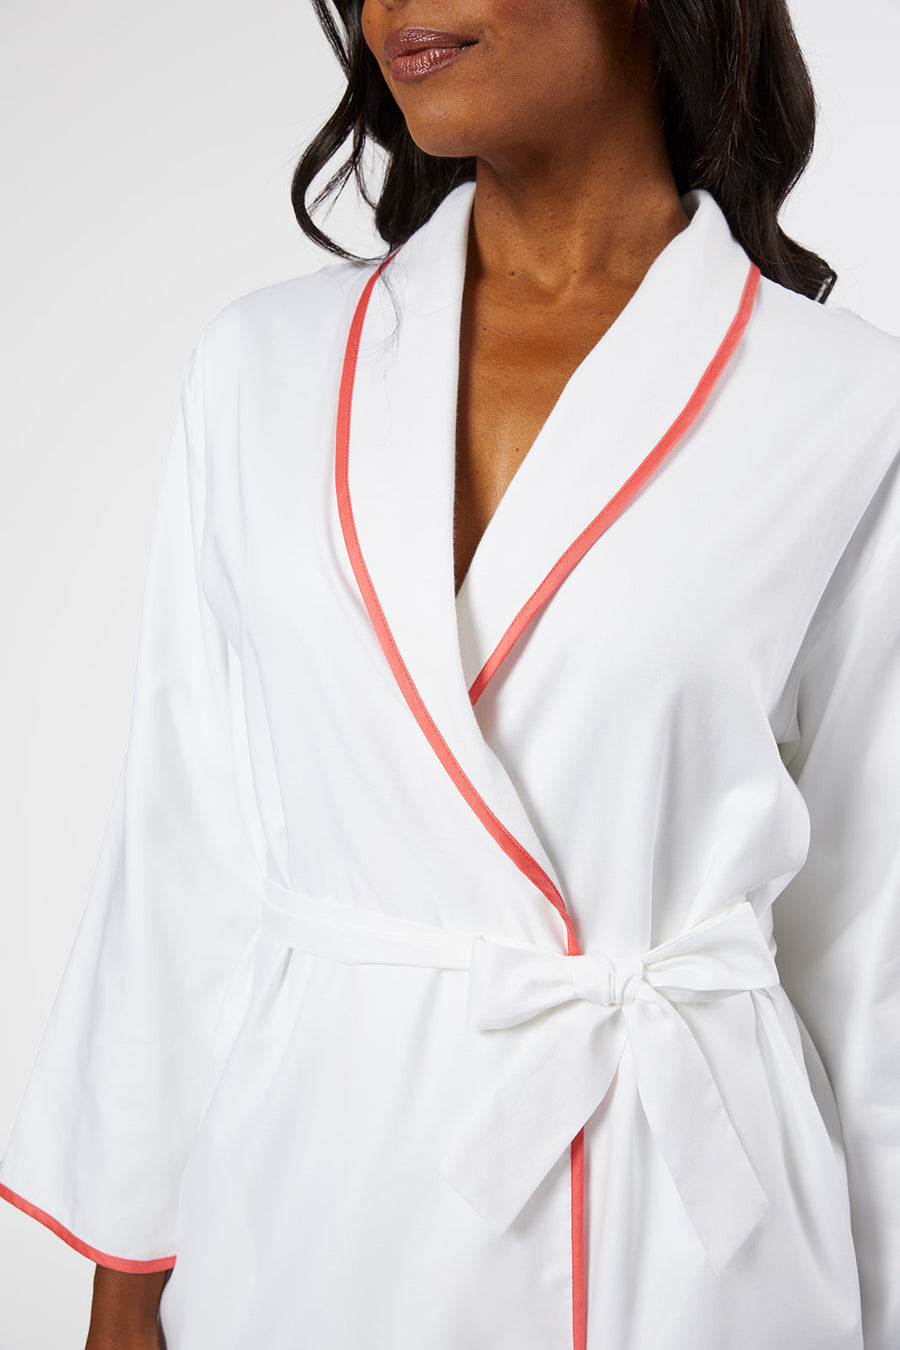 Vandy Cotton Robe in Coral